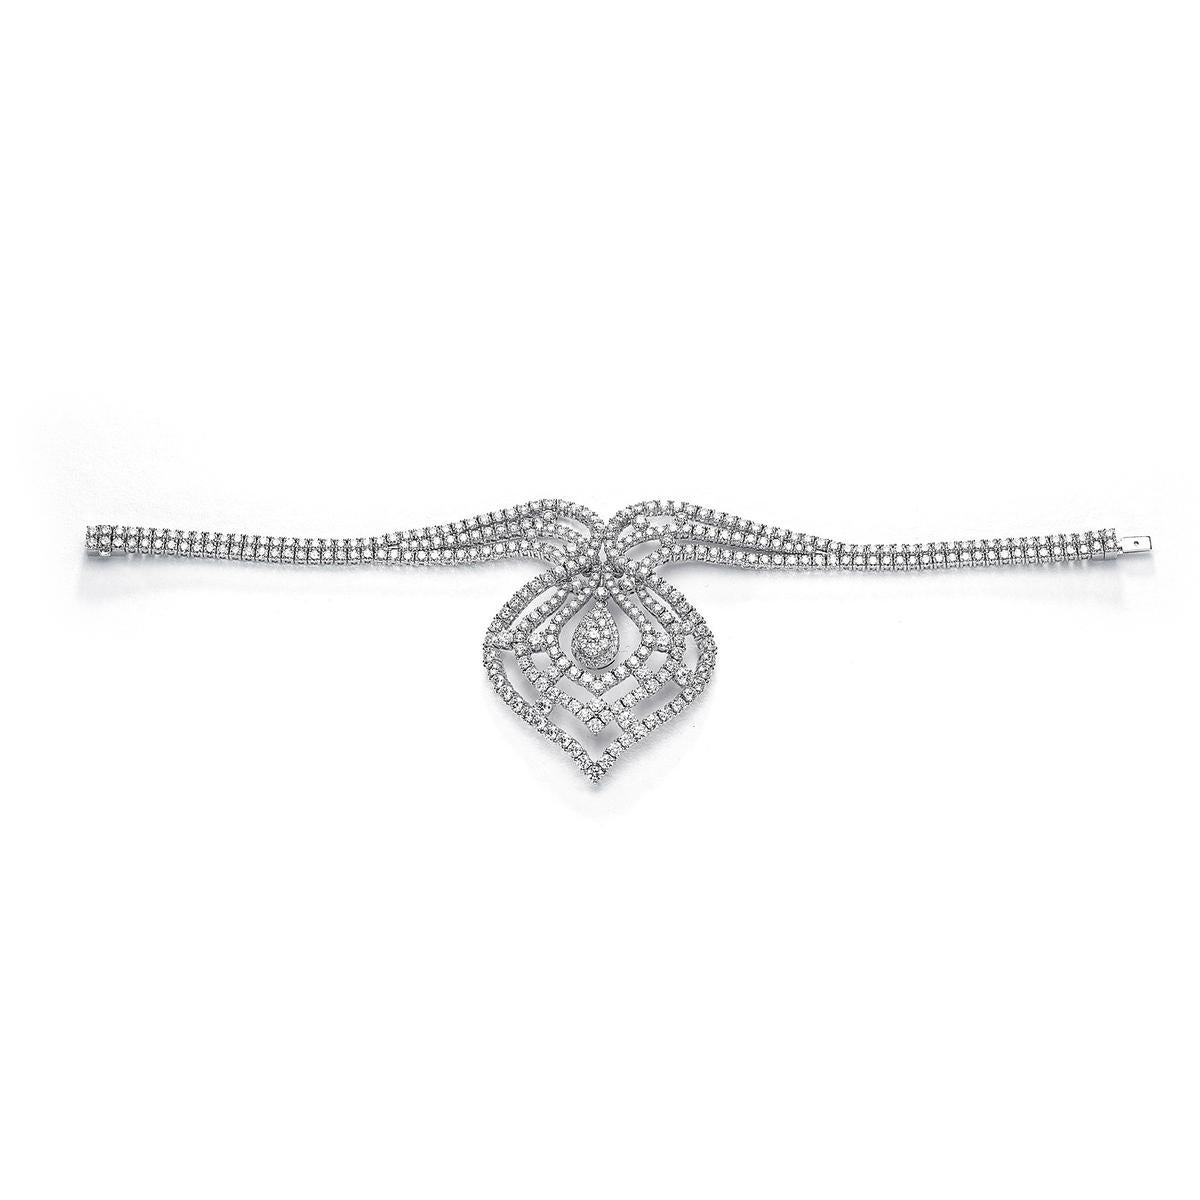 Bracelet in 18kt white gold set with 356 diamonds 12.55 cts